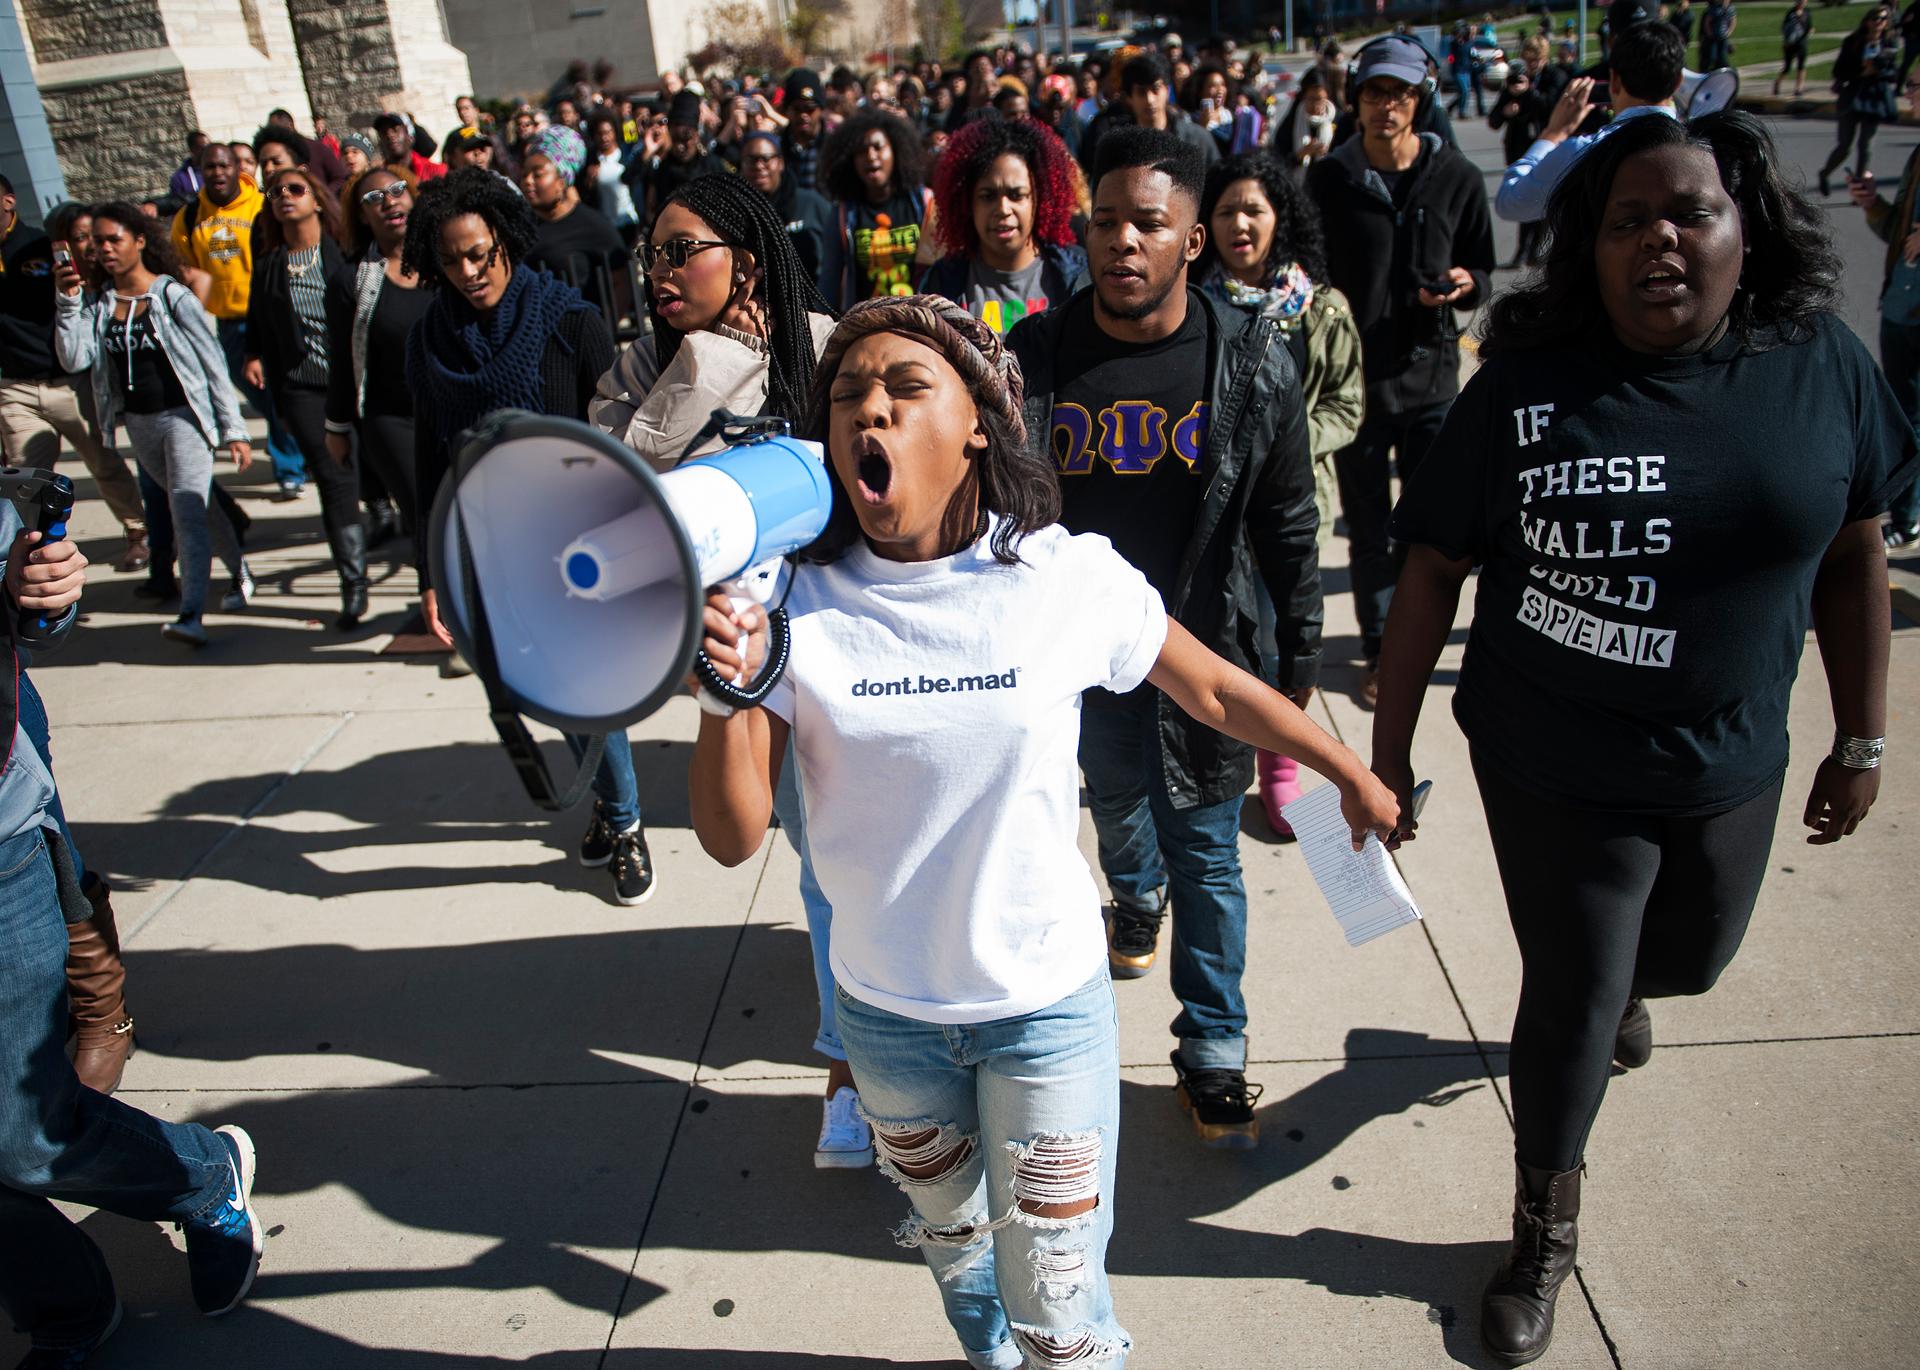 Concerned Student 1950 member Ayanna Poole uses a megaphone while leading a "We Are Not Afraid" march.